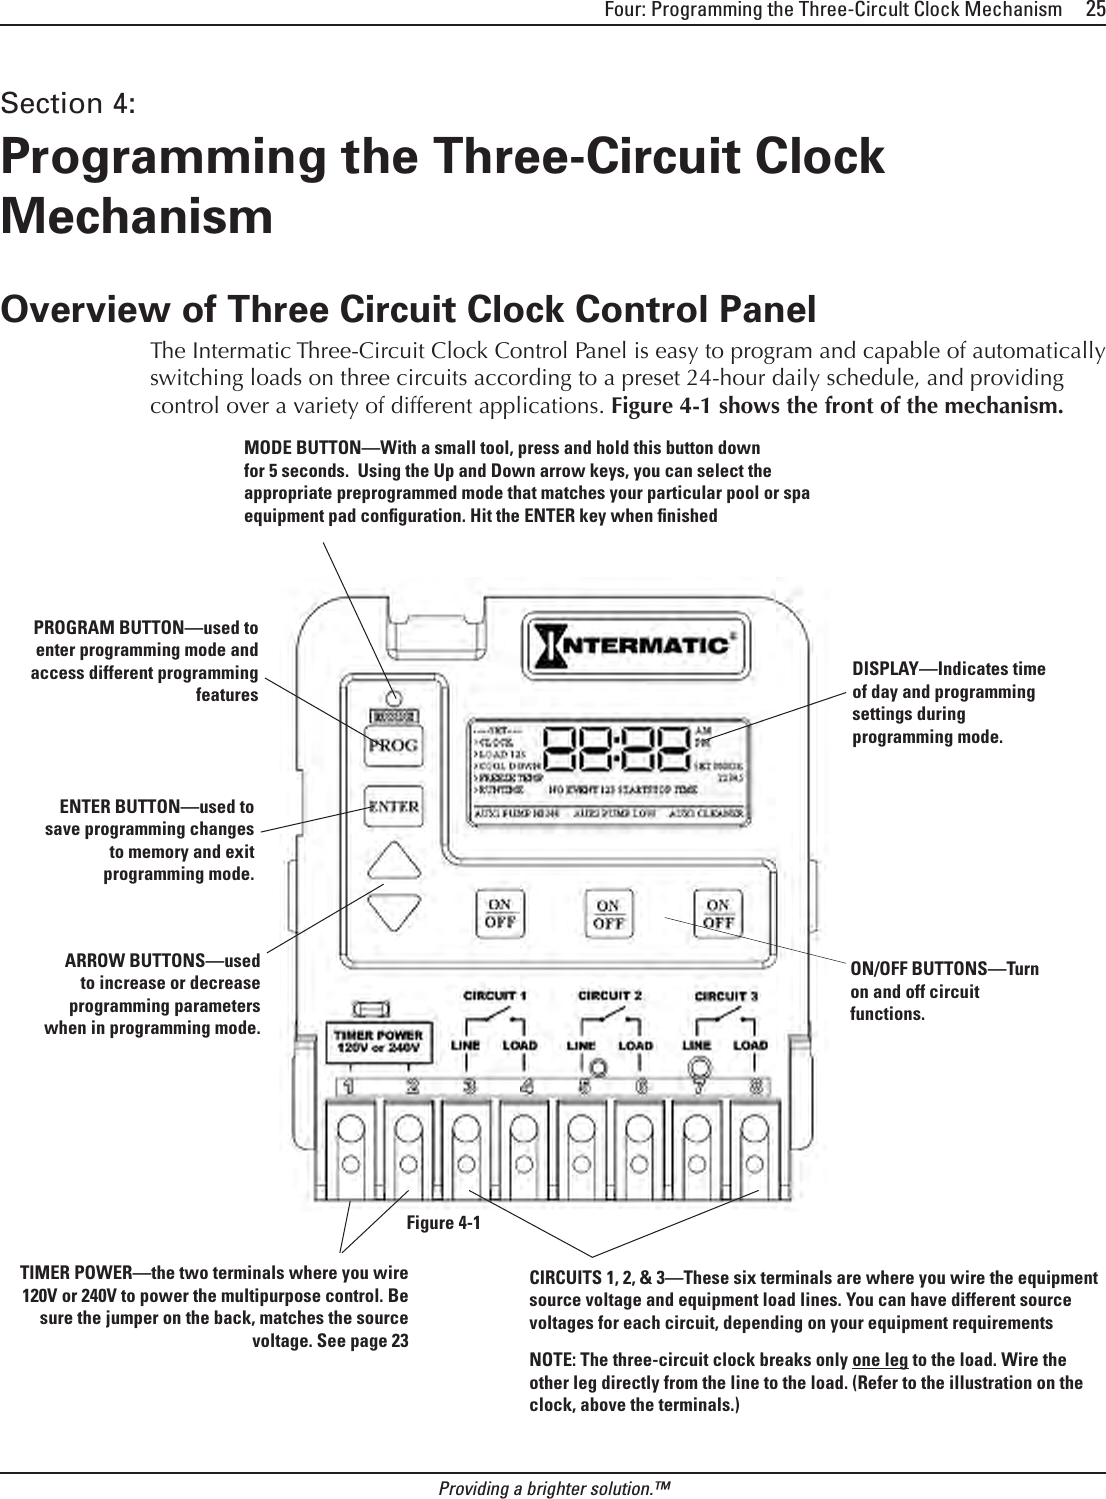 Four: Programming the Three-Circult Clock Mechanism     25Providing a brighter solution.™Section 4:  Programming the Three-Circuit Clock MechanismOverview of Three Circuit Clock Control PanelThe Intermatic Three-Circuit Clock Control Panel is easy to program and capable of automatically switching loads on three circuits according to a preset 24-hour daily schedule, and providing control over a variety of different applications. Figure 4-1 shows the front of the mechanism.PROGRAM BUTTON—used to enter programming mode and access different programming featuresENTER BUTTON—used to save programming changes to memory and exit programming mode.DISPLAY—Indicates time of day and programming settings during programming mode.ON/OFF BUTTONS—Turn on and off circuit functions.CIRCUITS 1, 2, &amp; 3—These six terminals are where you wire the equipment source voltage and equipment load lines. You can have different source voltages for each circuit, depending on your equipment requirements NOTE: The three-circuit clock breaks only one leg to the load. Wire the other leg directly from the line to the load. (Refer to the illustration on the clock, above the terminals.)ARROW BUTTONS—used to increase or decrease programming parameters when in programming mode.MODE BUTTON—With a small tool, press and hold this button down for 5 seconds.  Using the Up and Down arrow keys, you can select the appropriate preprogrammed mode that matches your particular pool or spa equipment pad conﬁguration. Hit the ENTER key when ﬁnishedTIMER POWER—the two terminals where you wire 120V or 240V to power the multipurpose control. Be sure the jumper on the back, matches the source voltage. See page 23Figure 4-1